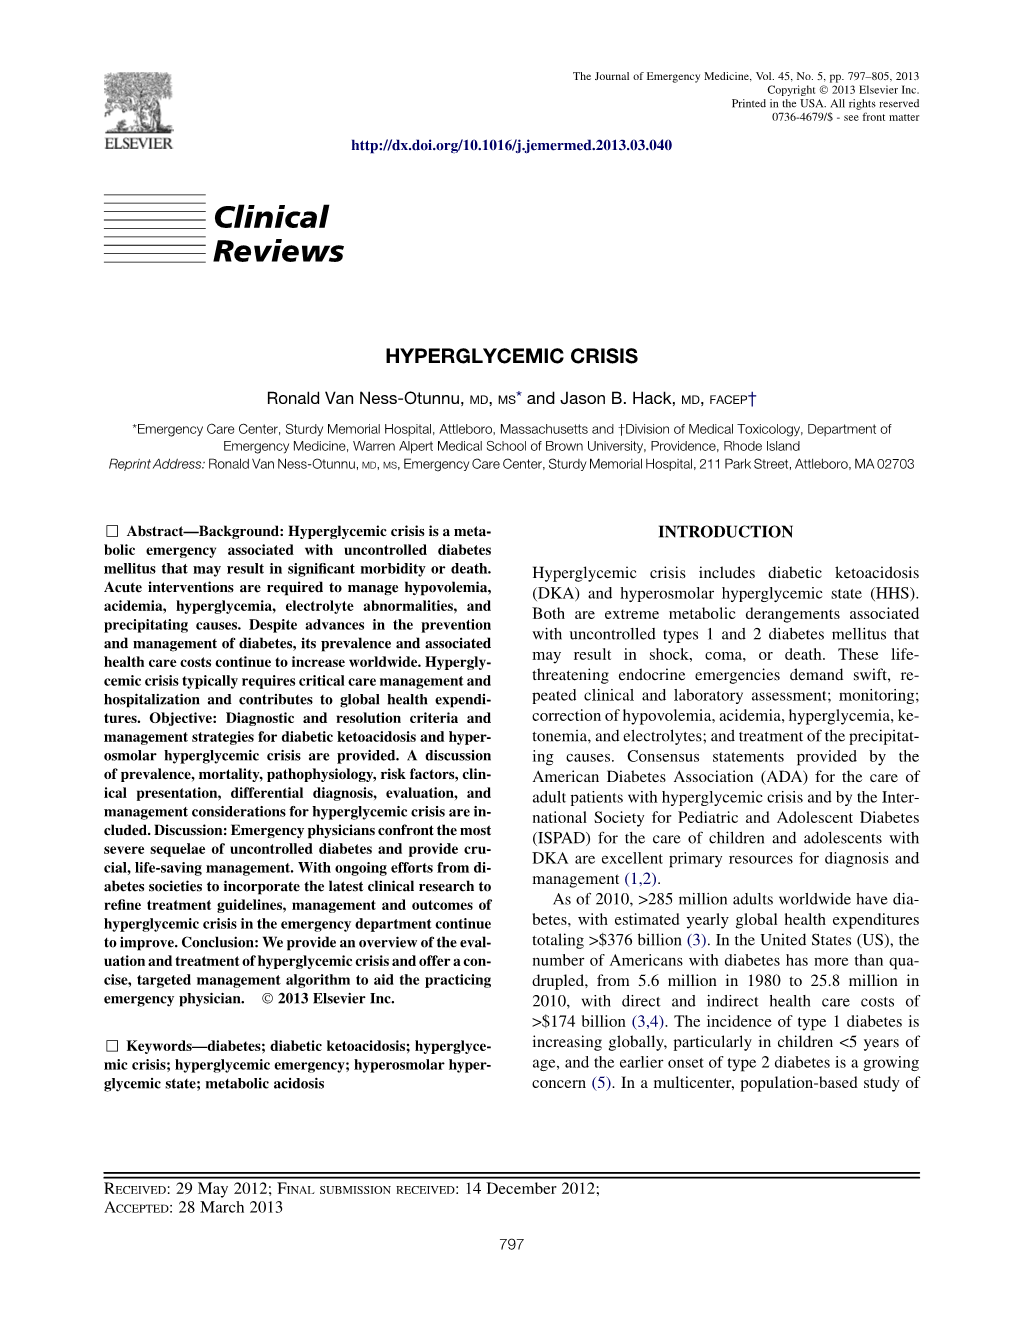 Clinical Reviews